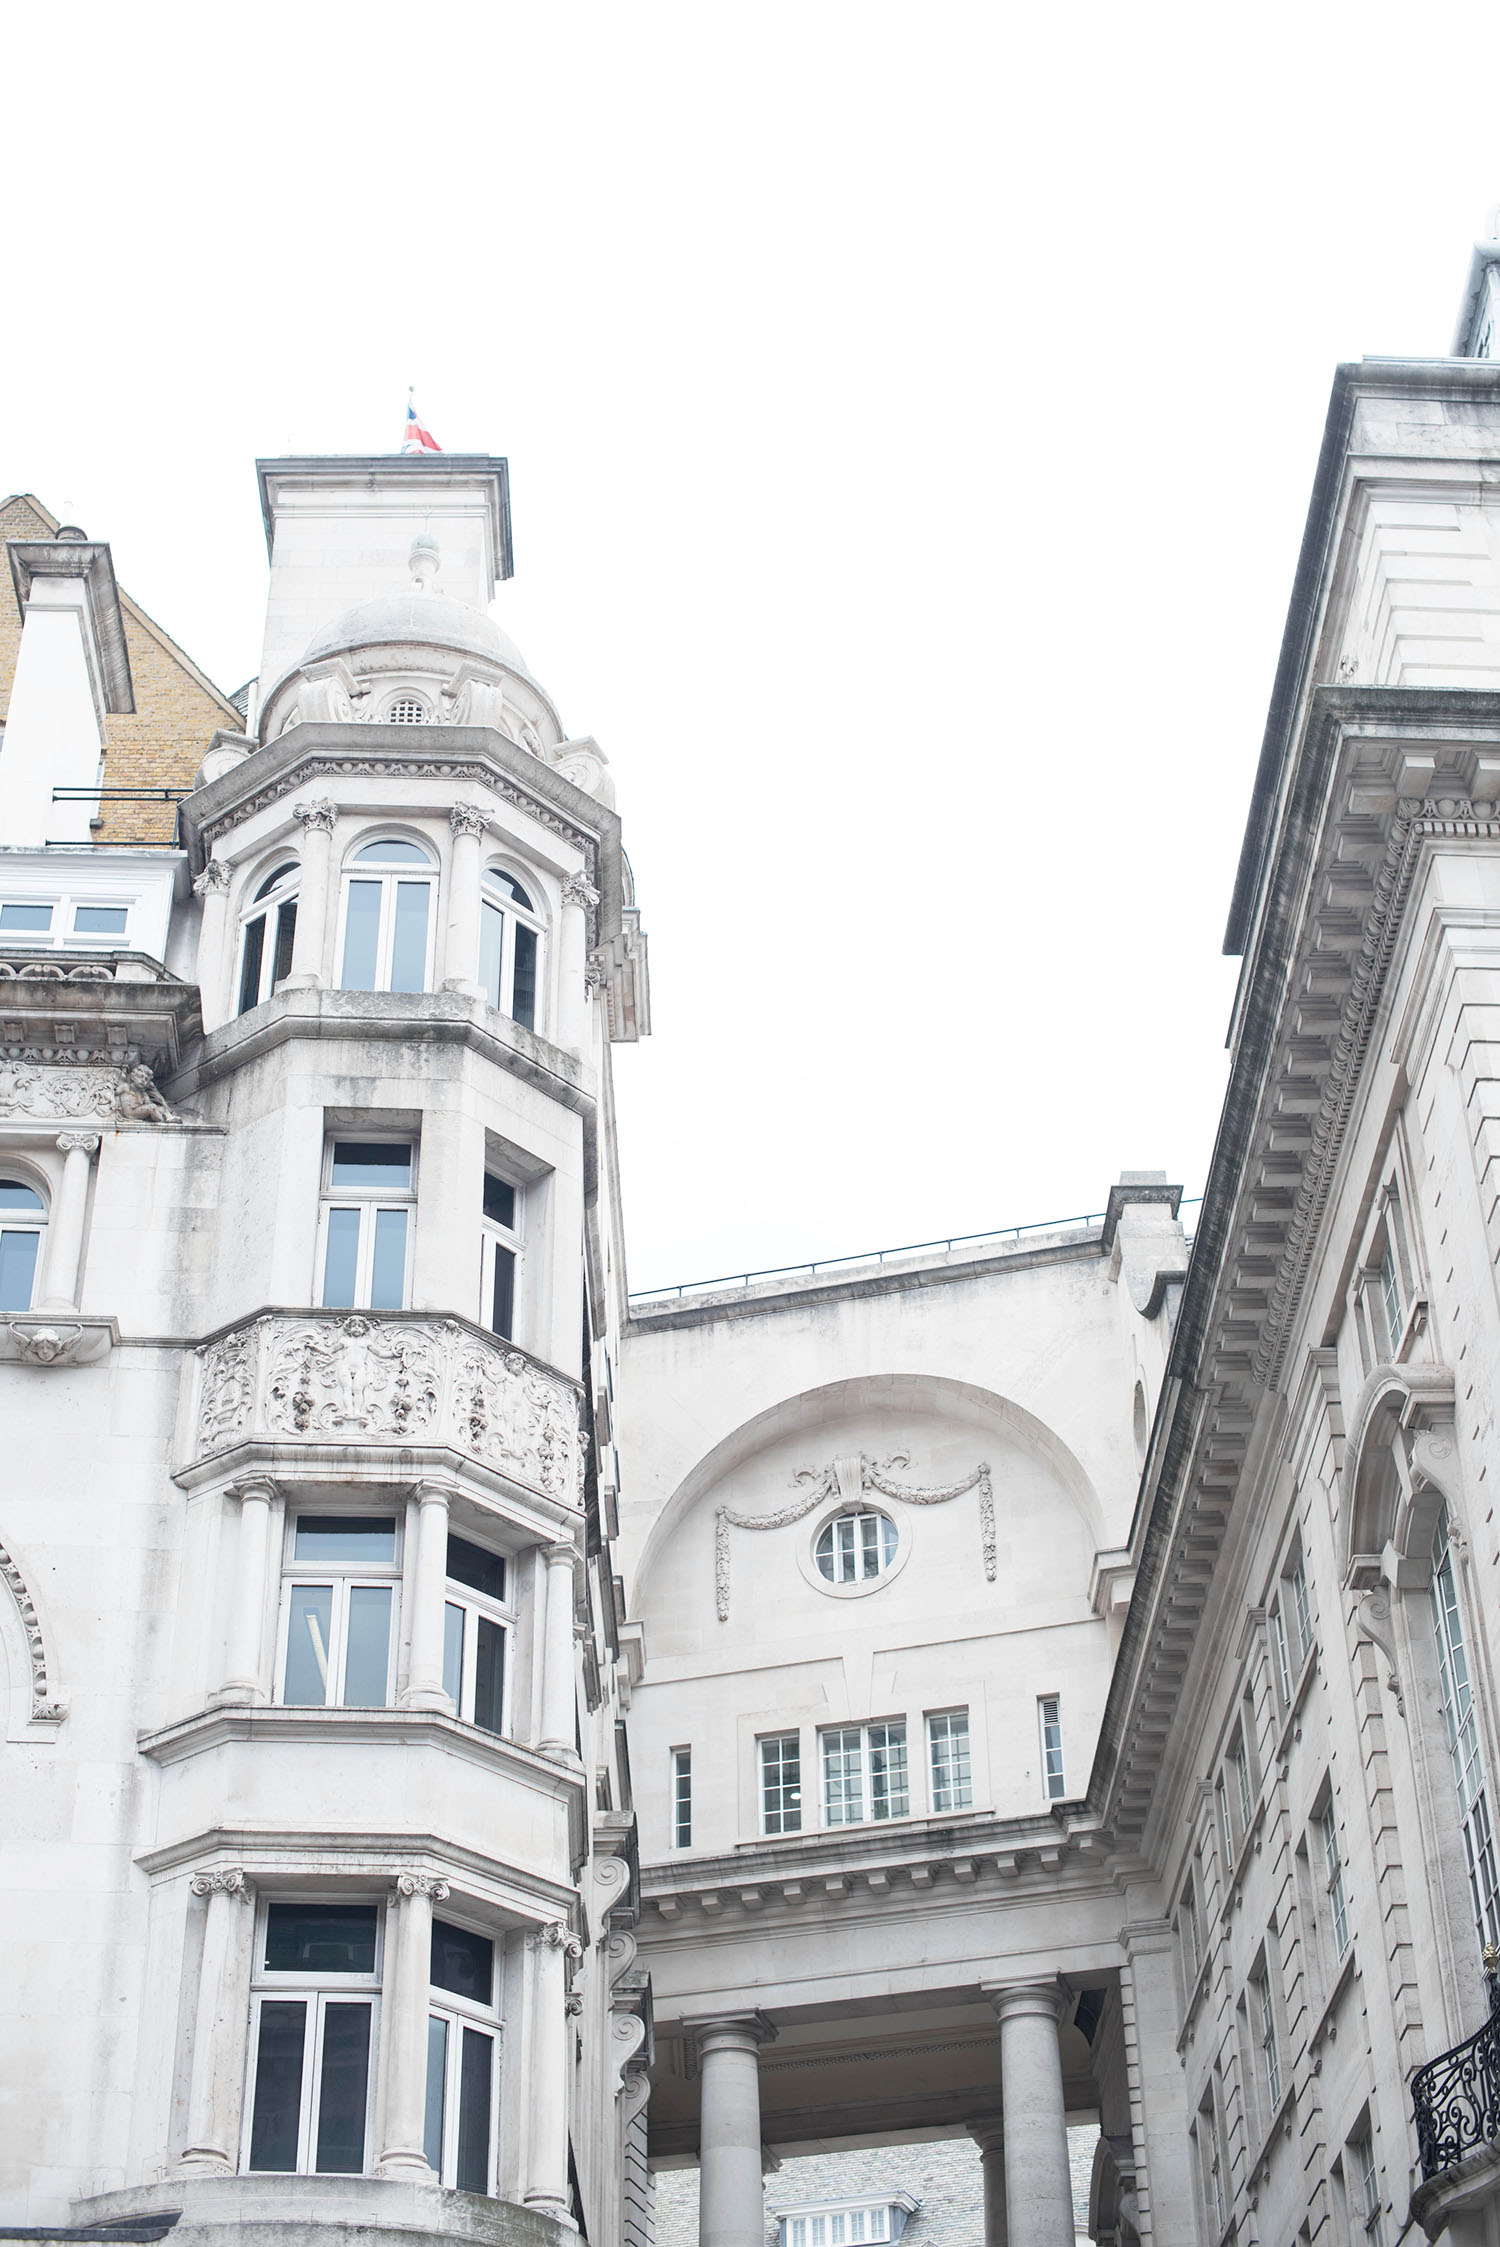 Ornate white buildings in Central London, as photographed by travel blogger Cee Fardoe of Coco & Vera